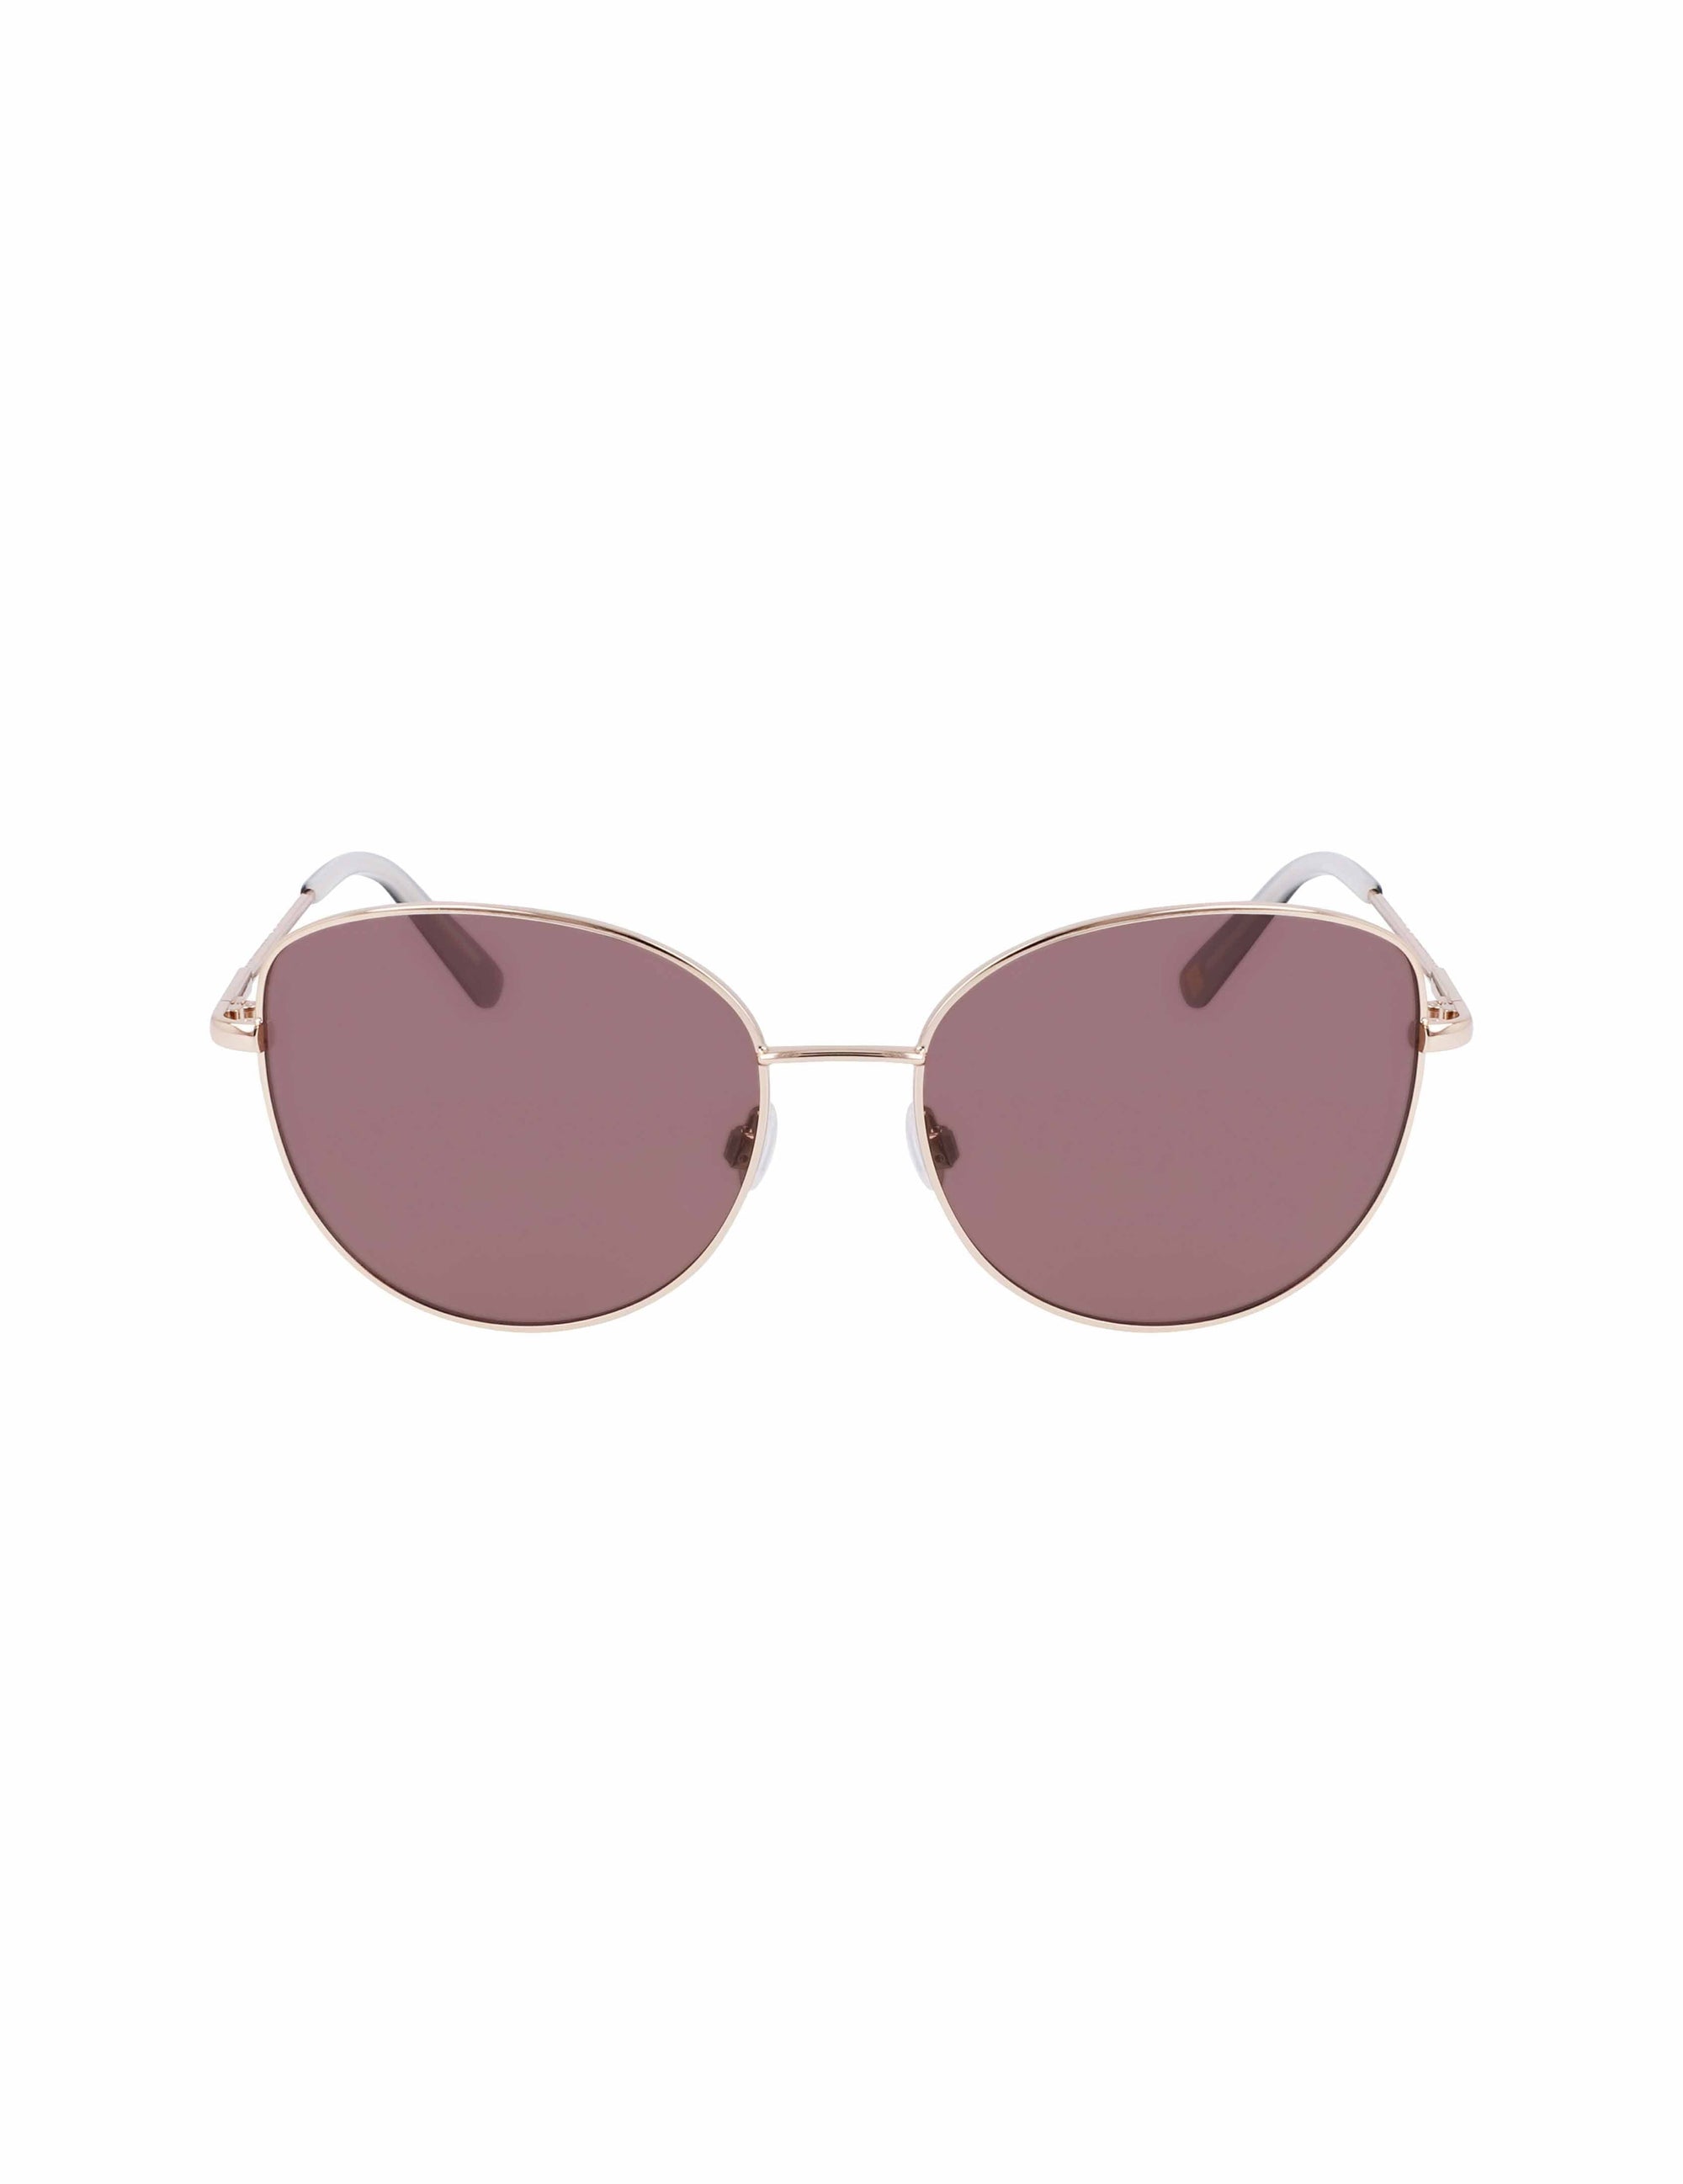 Round Sunglasses - Silver-colored/pink - Men | H&M US